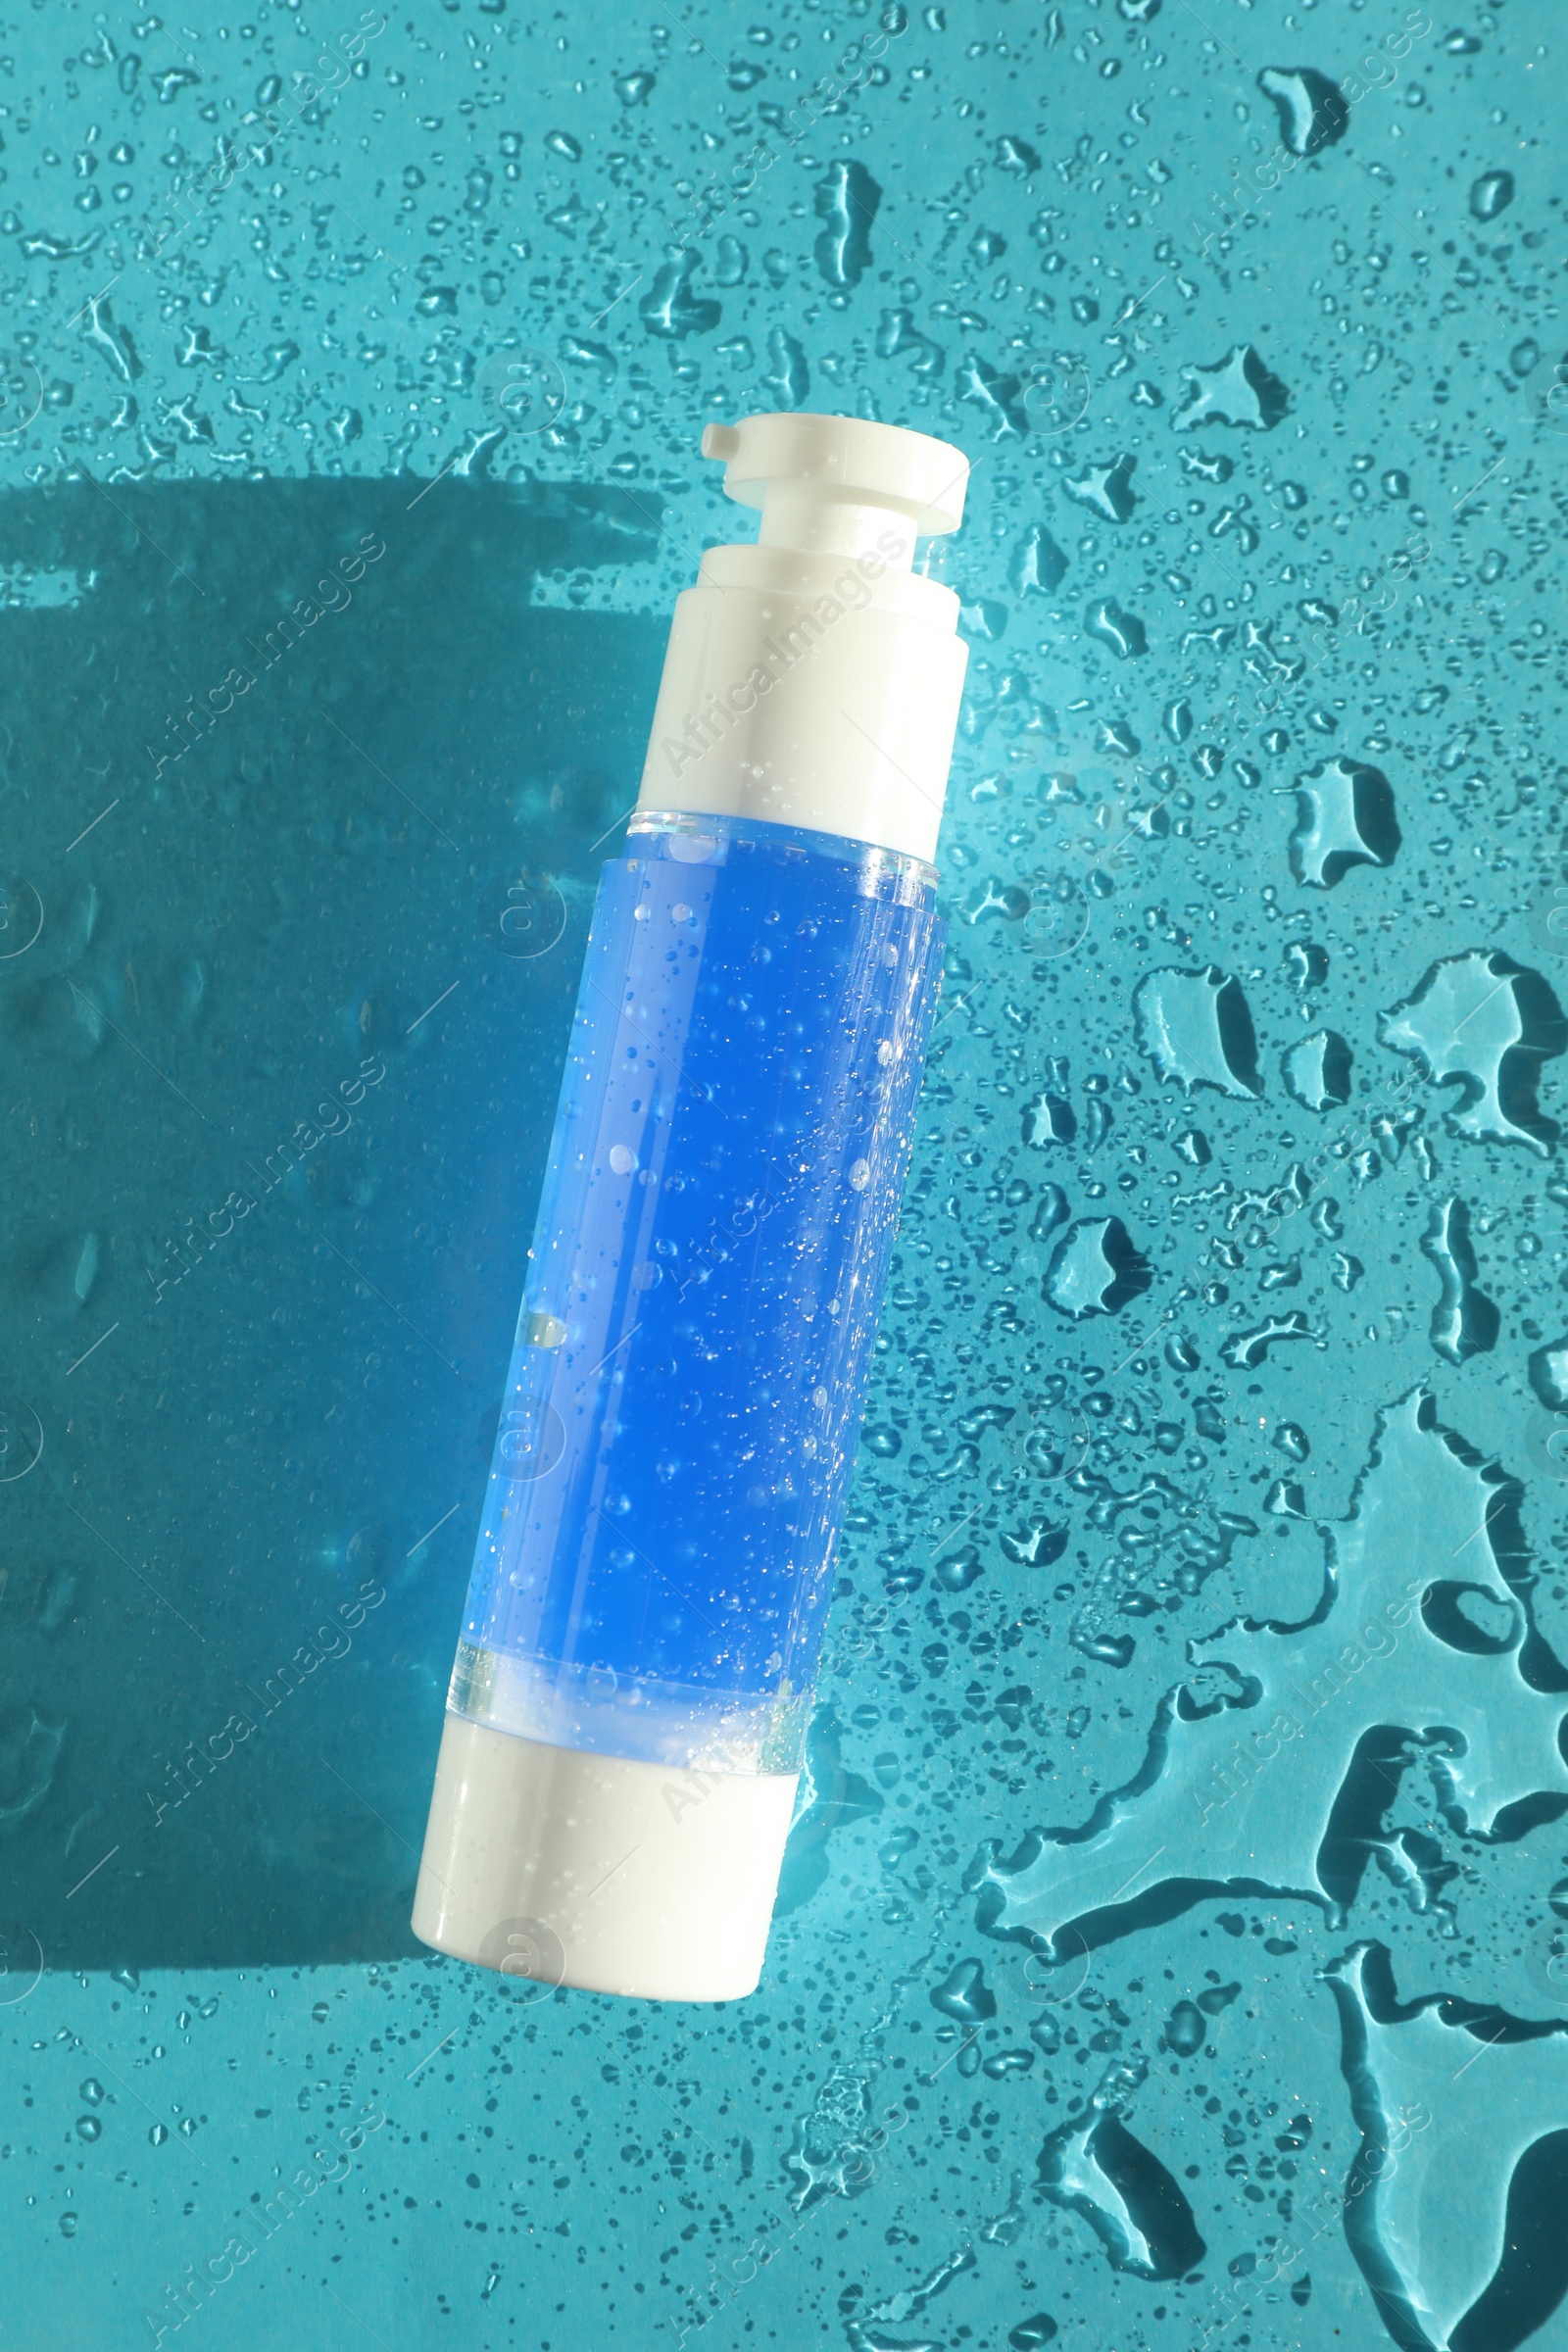 Photo of Bottle of cosmetic product on wet turquoise background, top view